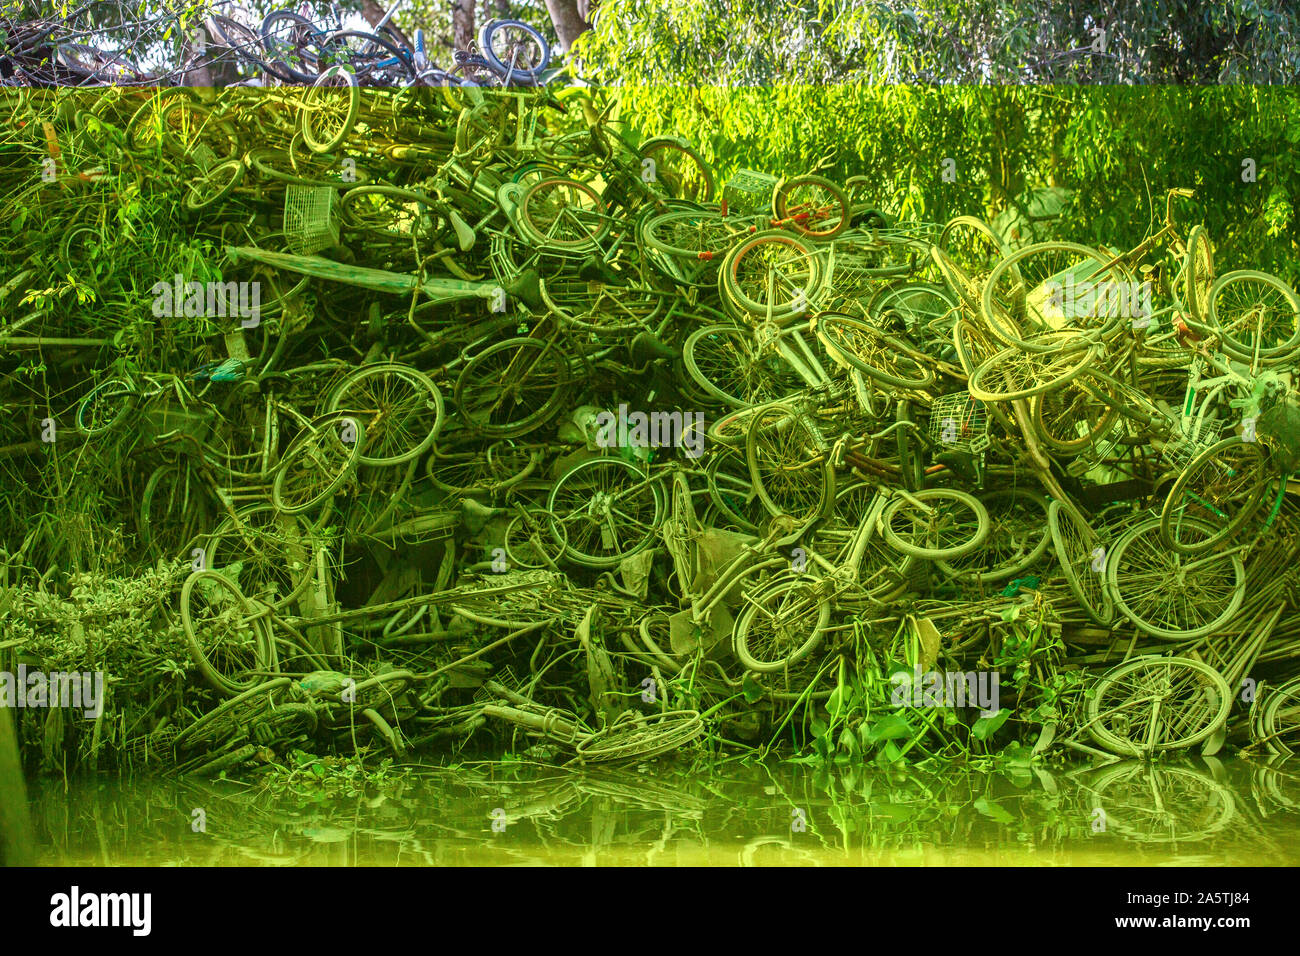 A pile of junked bicycles Stock Photo